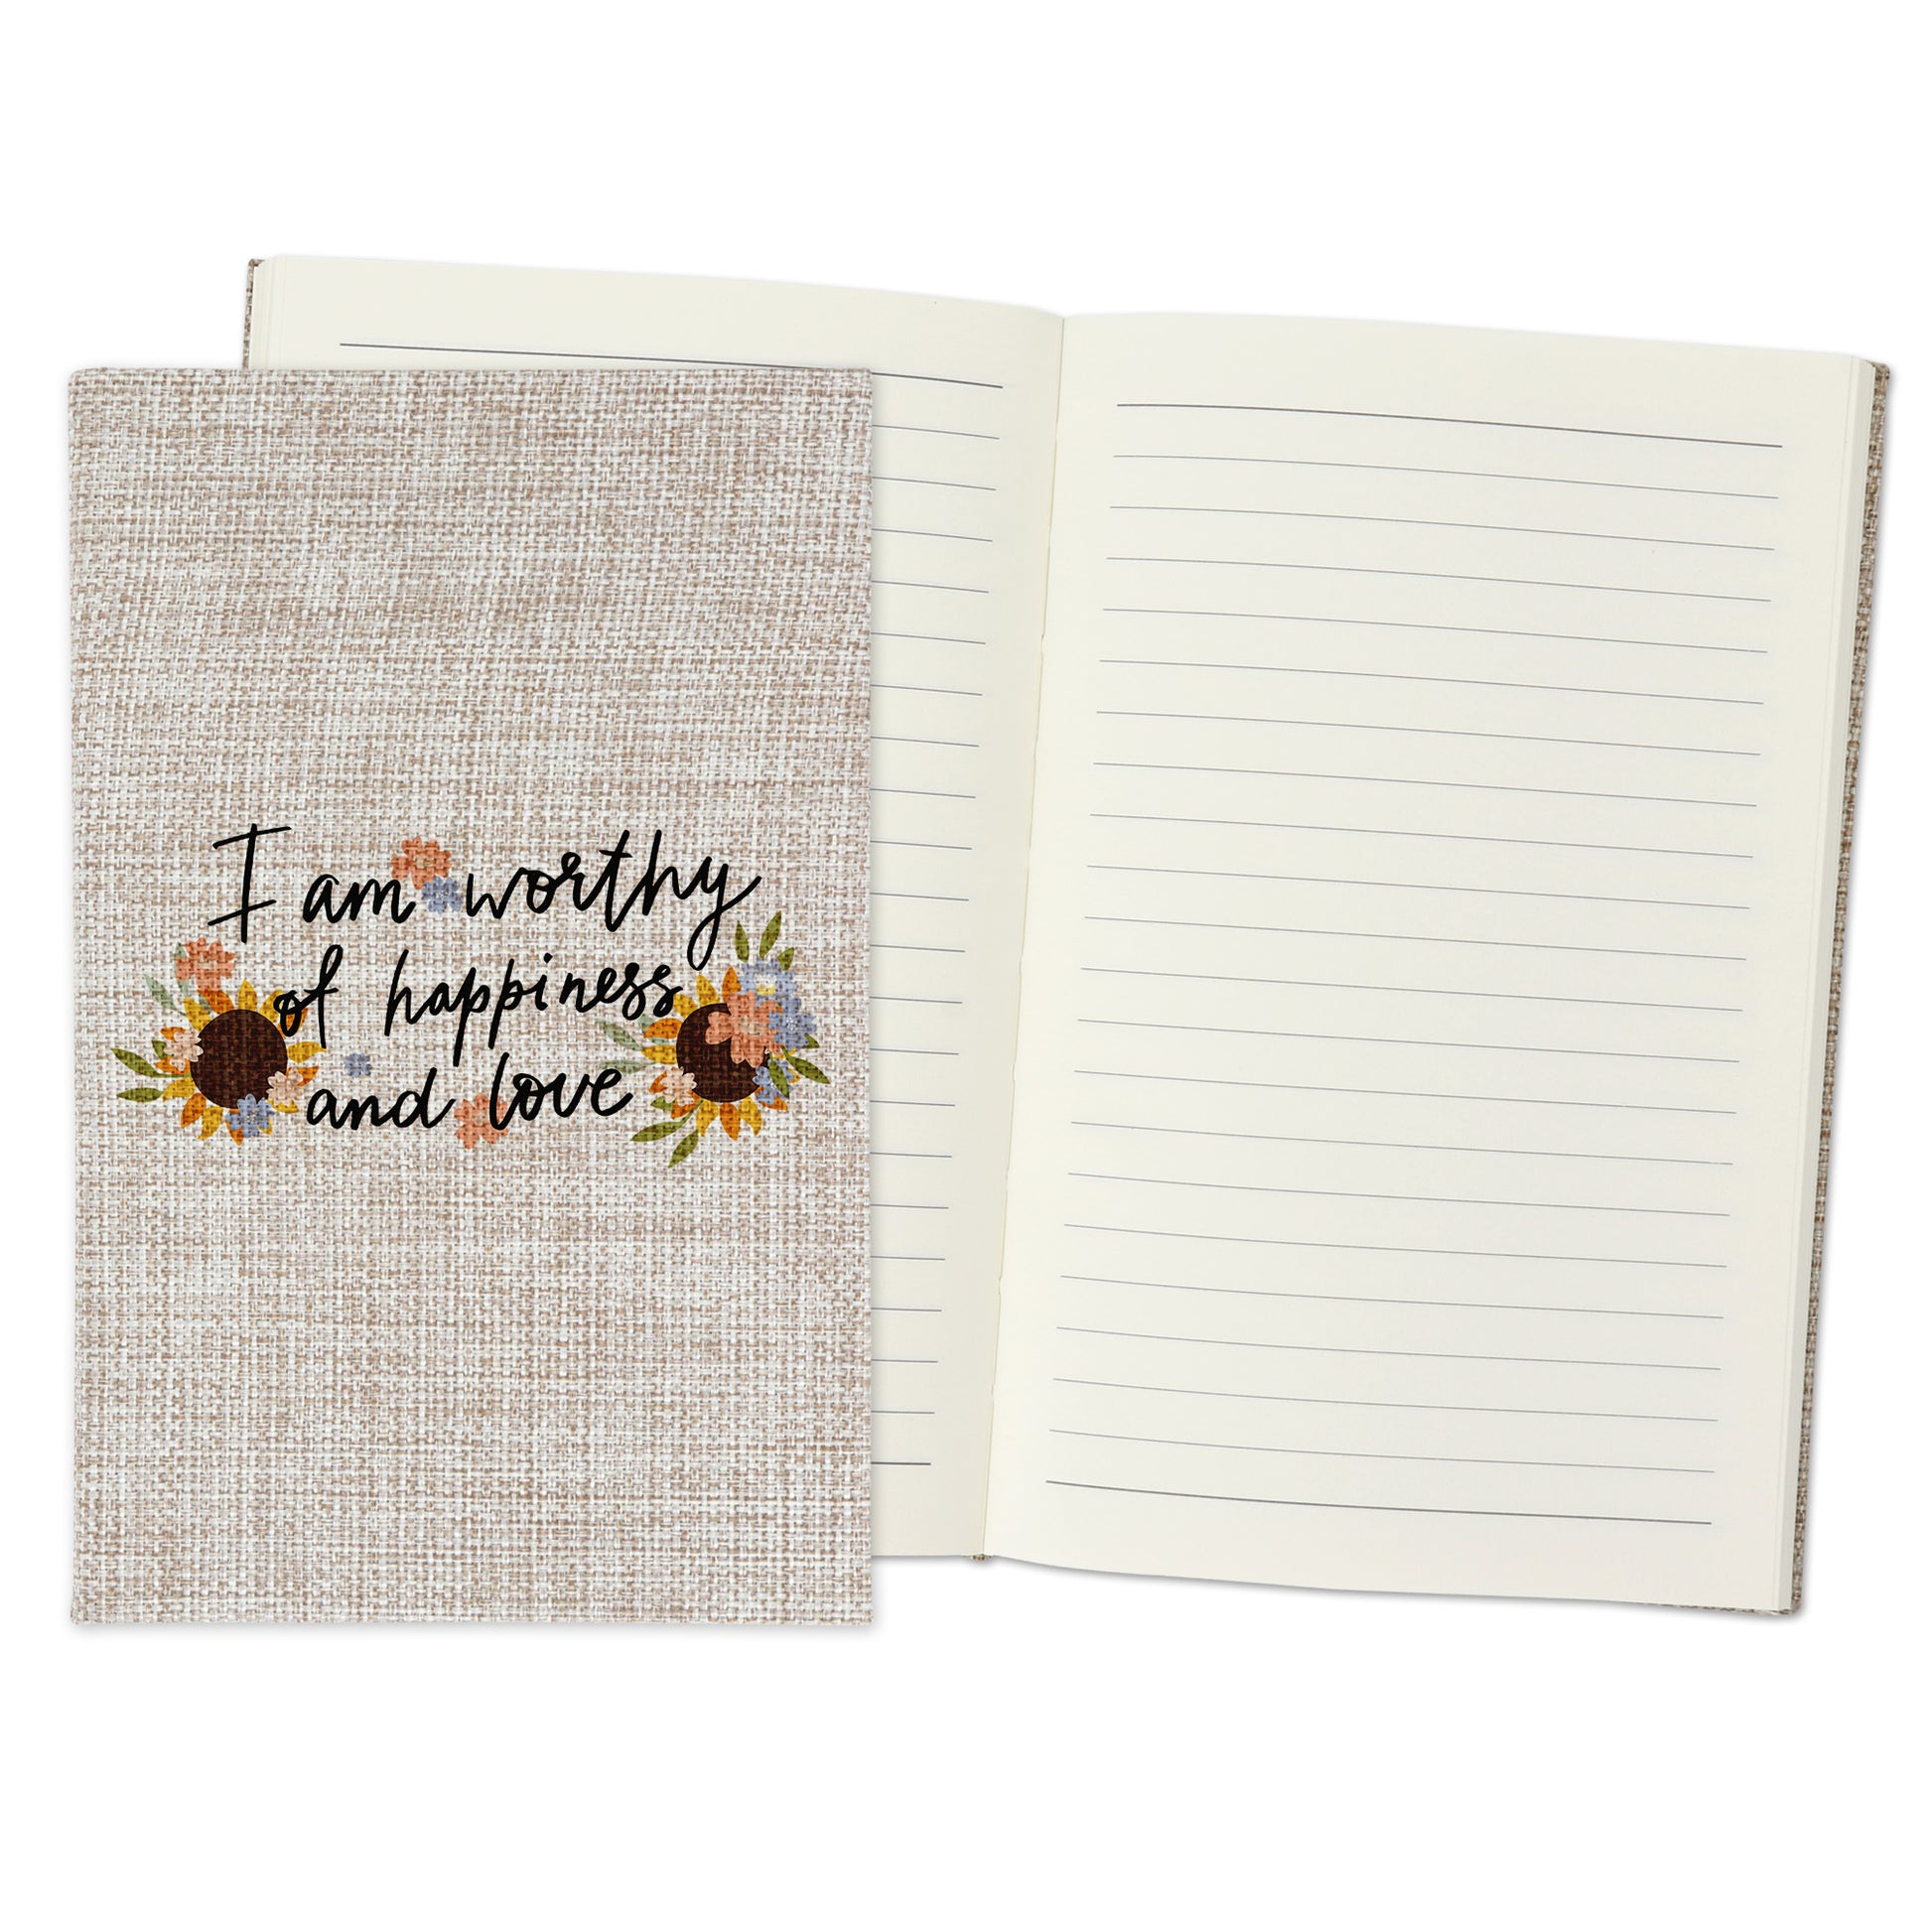 I am Worthy of Happiness and Love - Affirmation Quote Burlap Notebook Journal with Lined Pages